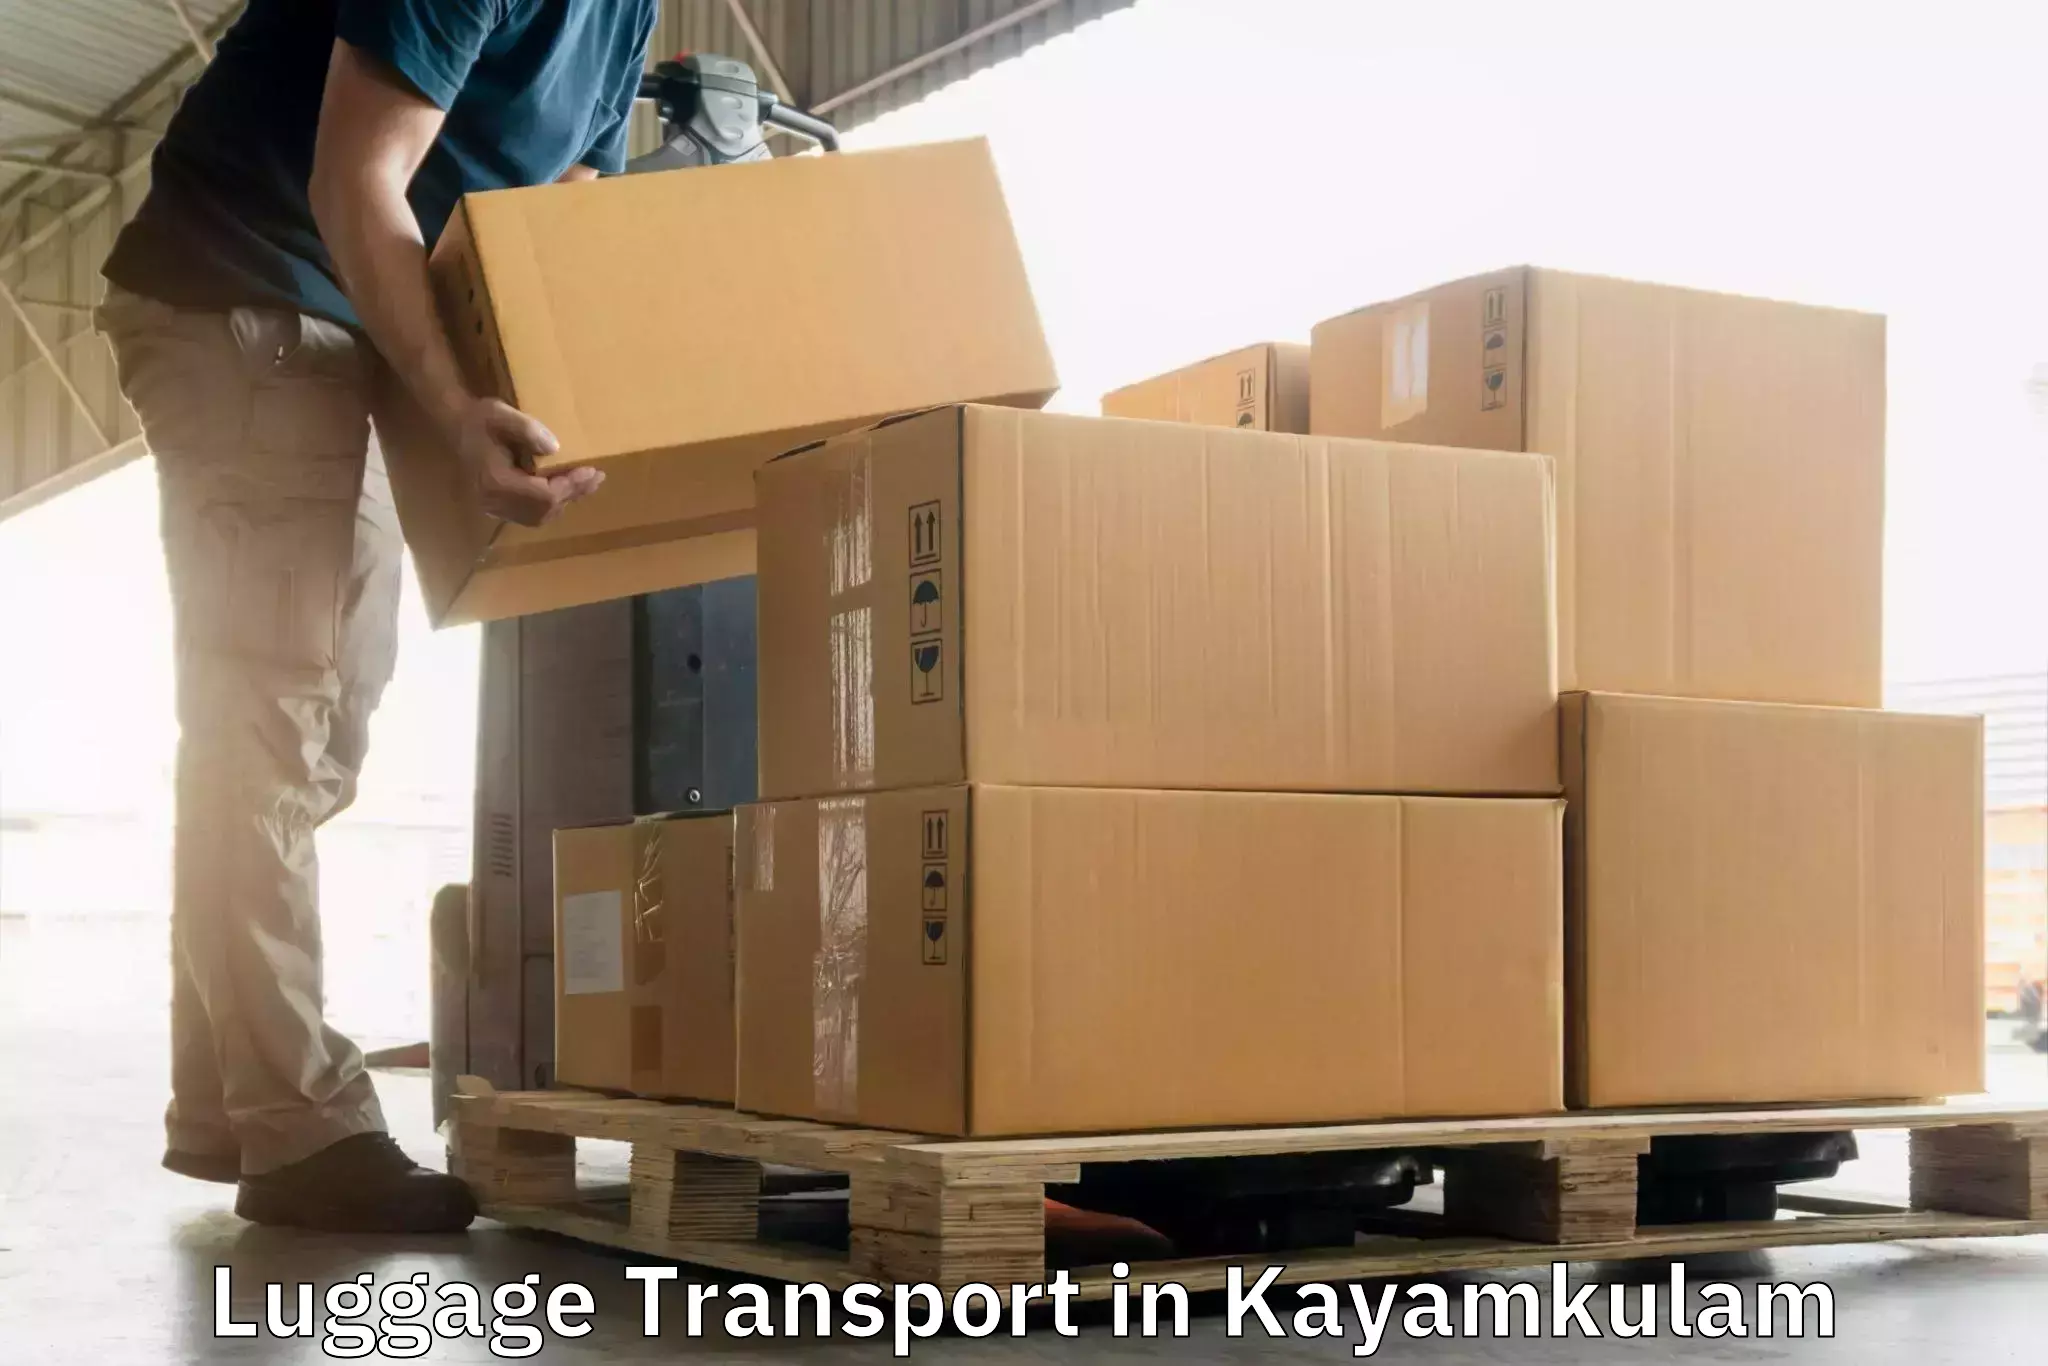 Luggage storage and delivery in Kayamkulam